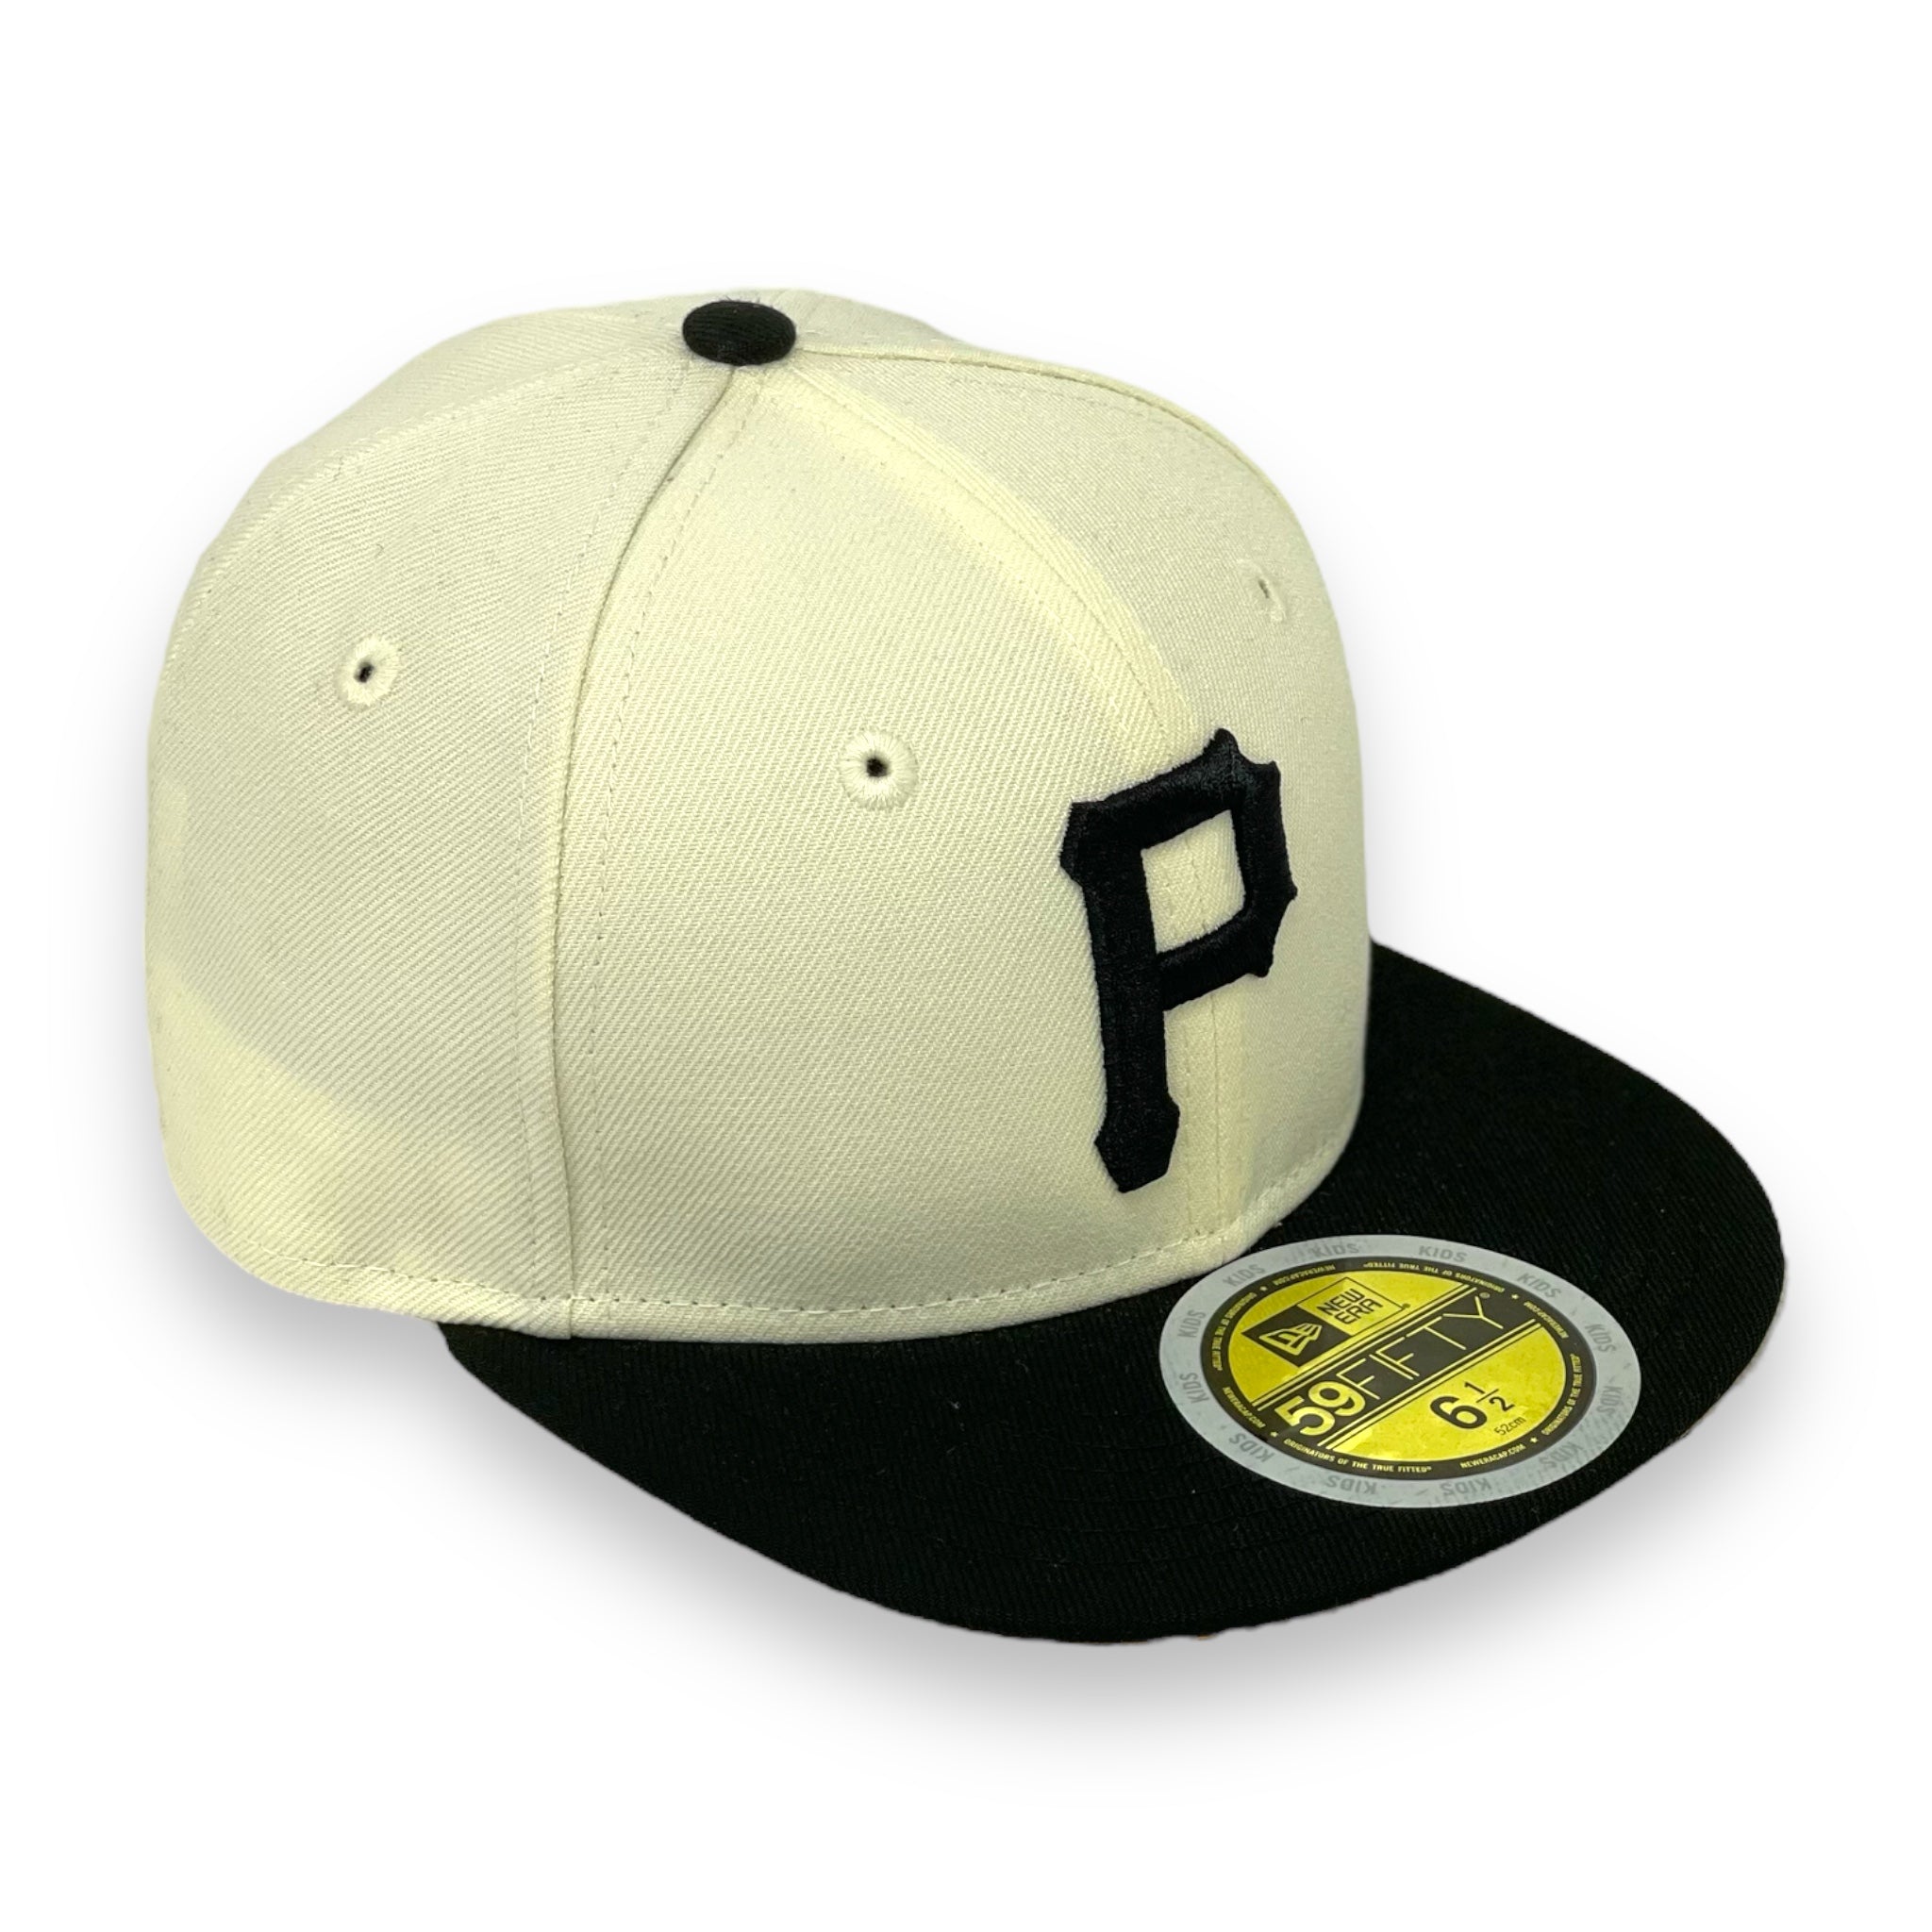 “KIDS” - PITTSBURGH PIRATES (OFF-WHITE) NEW ERA 59FIFTY FITTED (YELLOW UNDER VISOR)